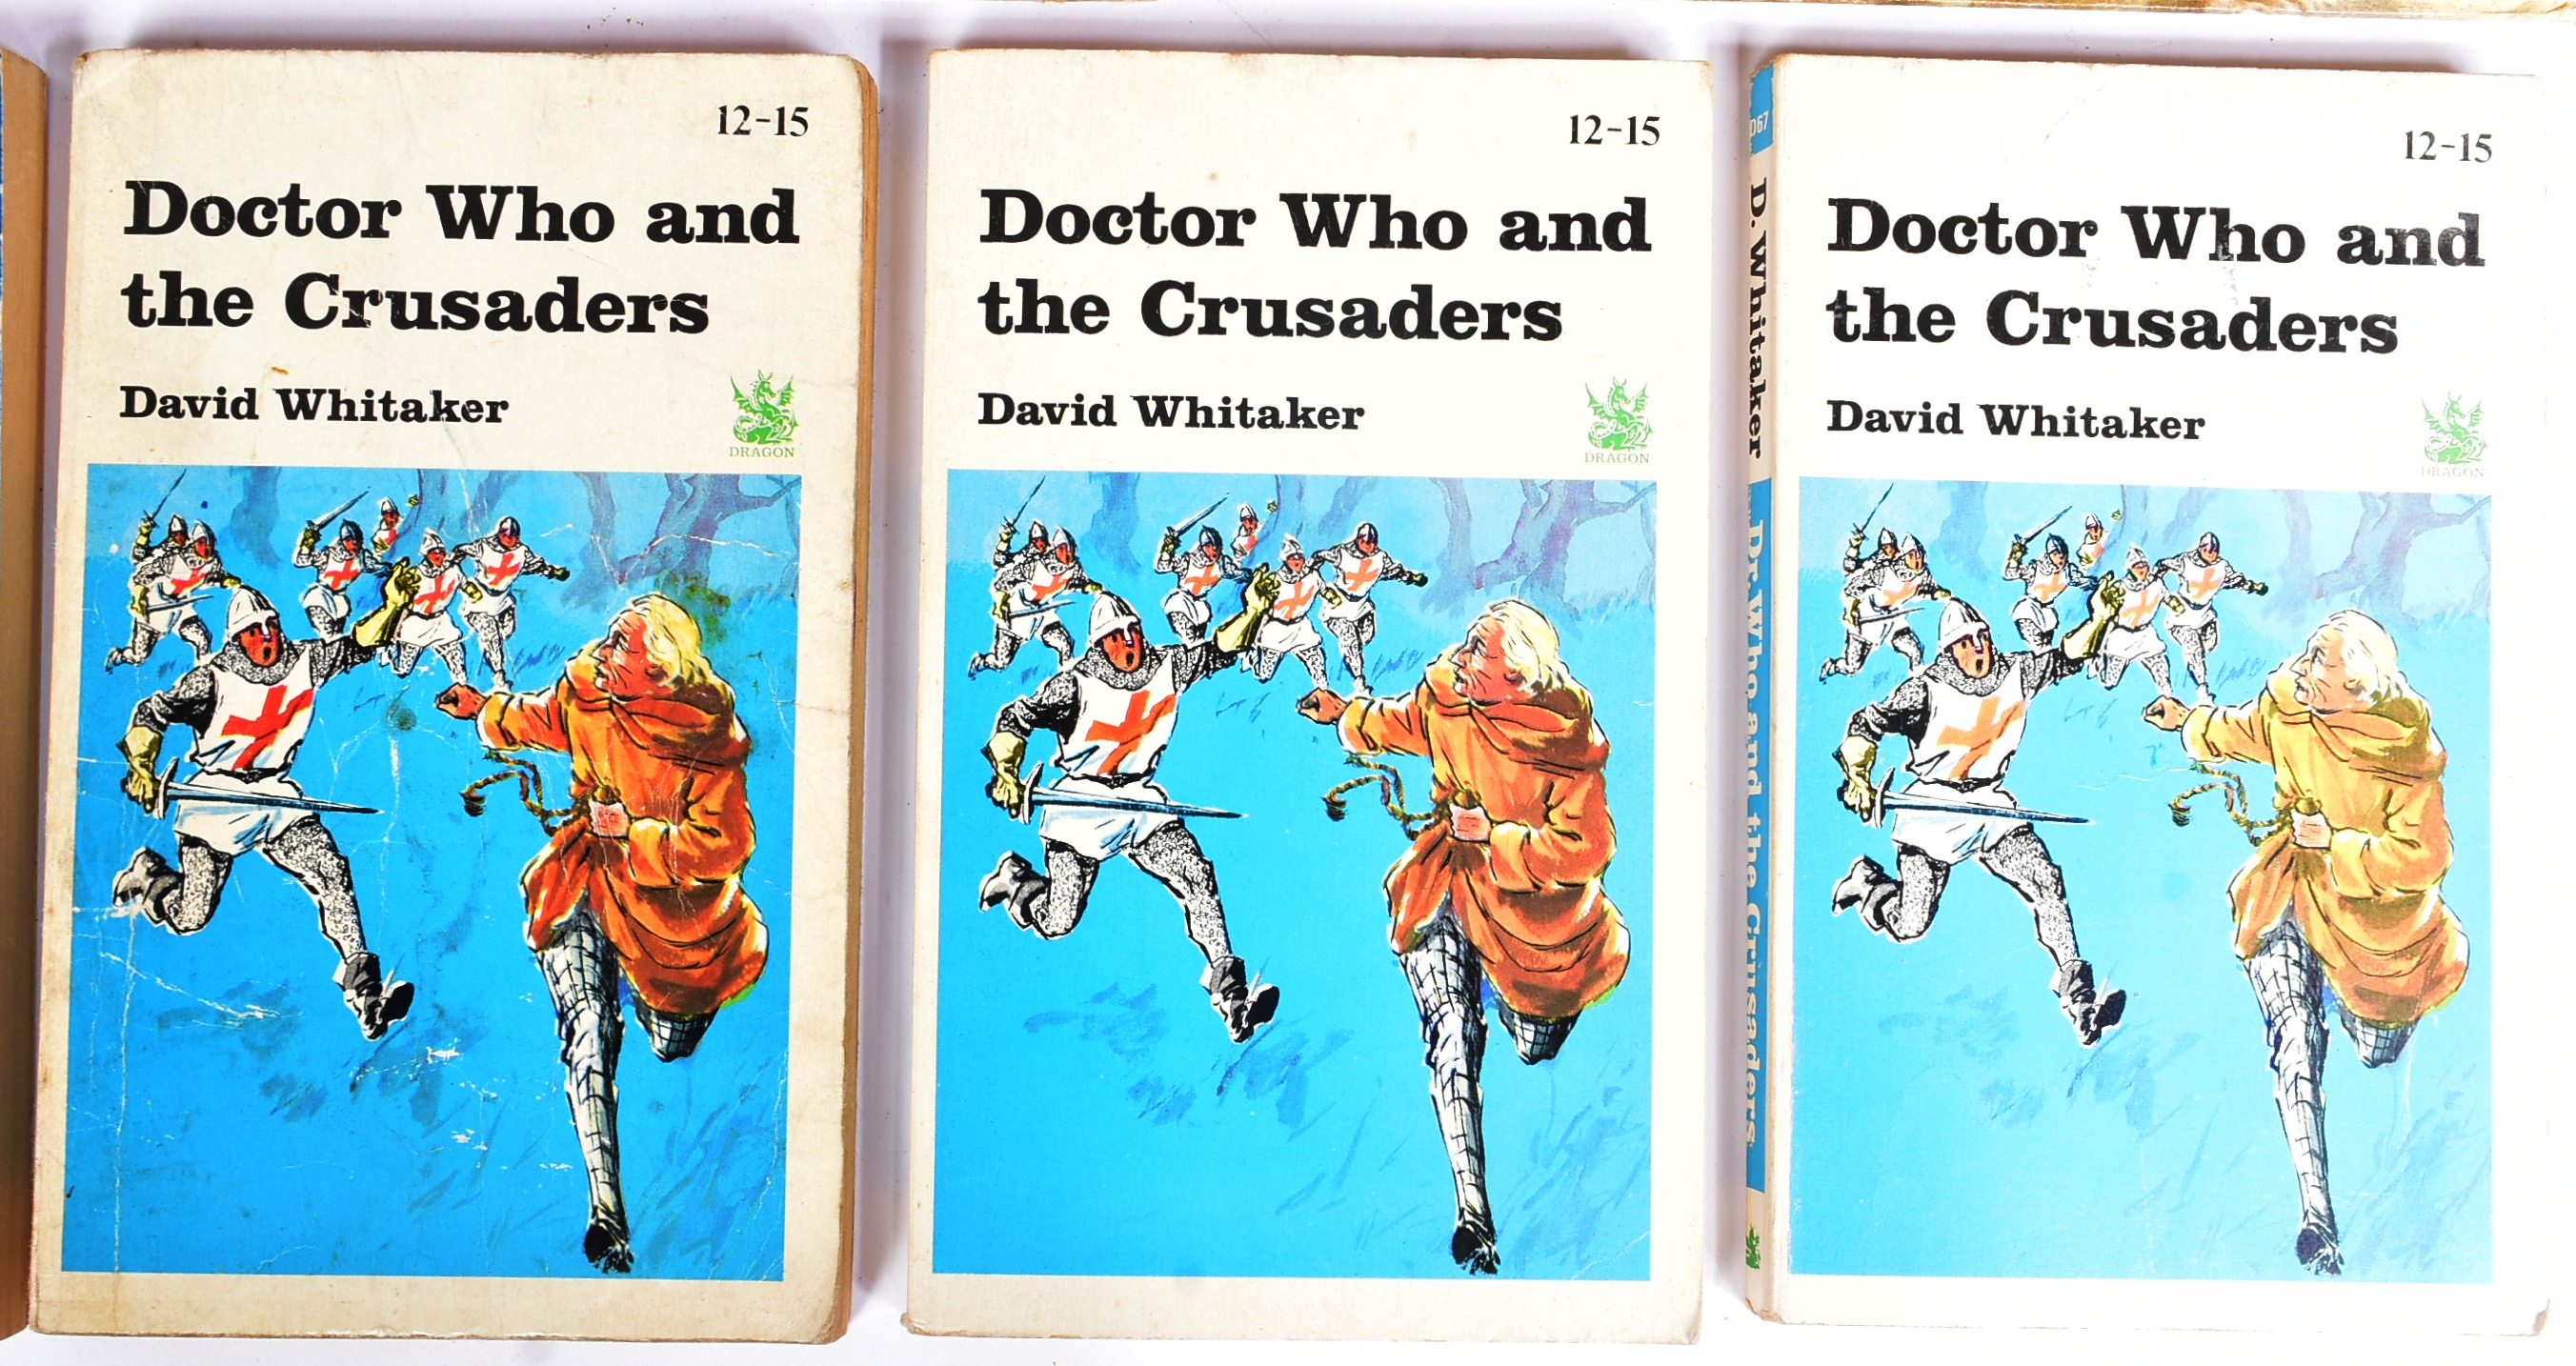 DOCTOR WHO - EARLY 1960S PUBLICATIONS - DALEK WORLD ETC - Image 3 of 5